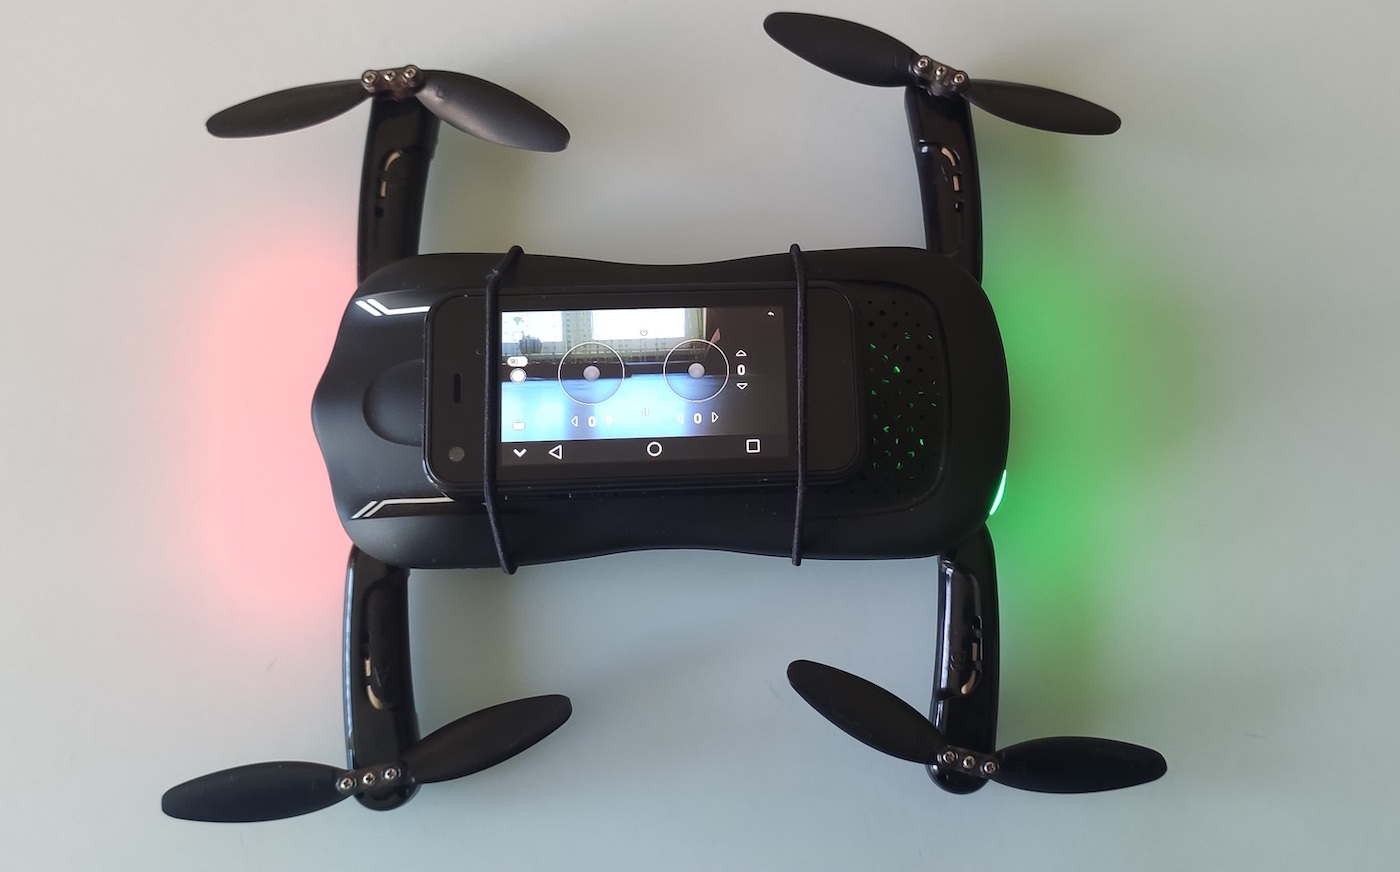 A low-cost indoor drone and a small phone